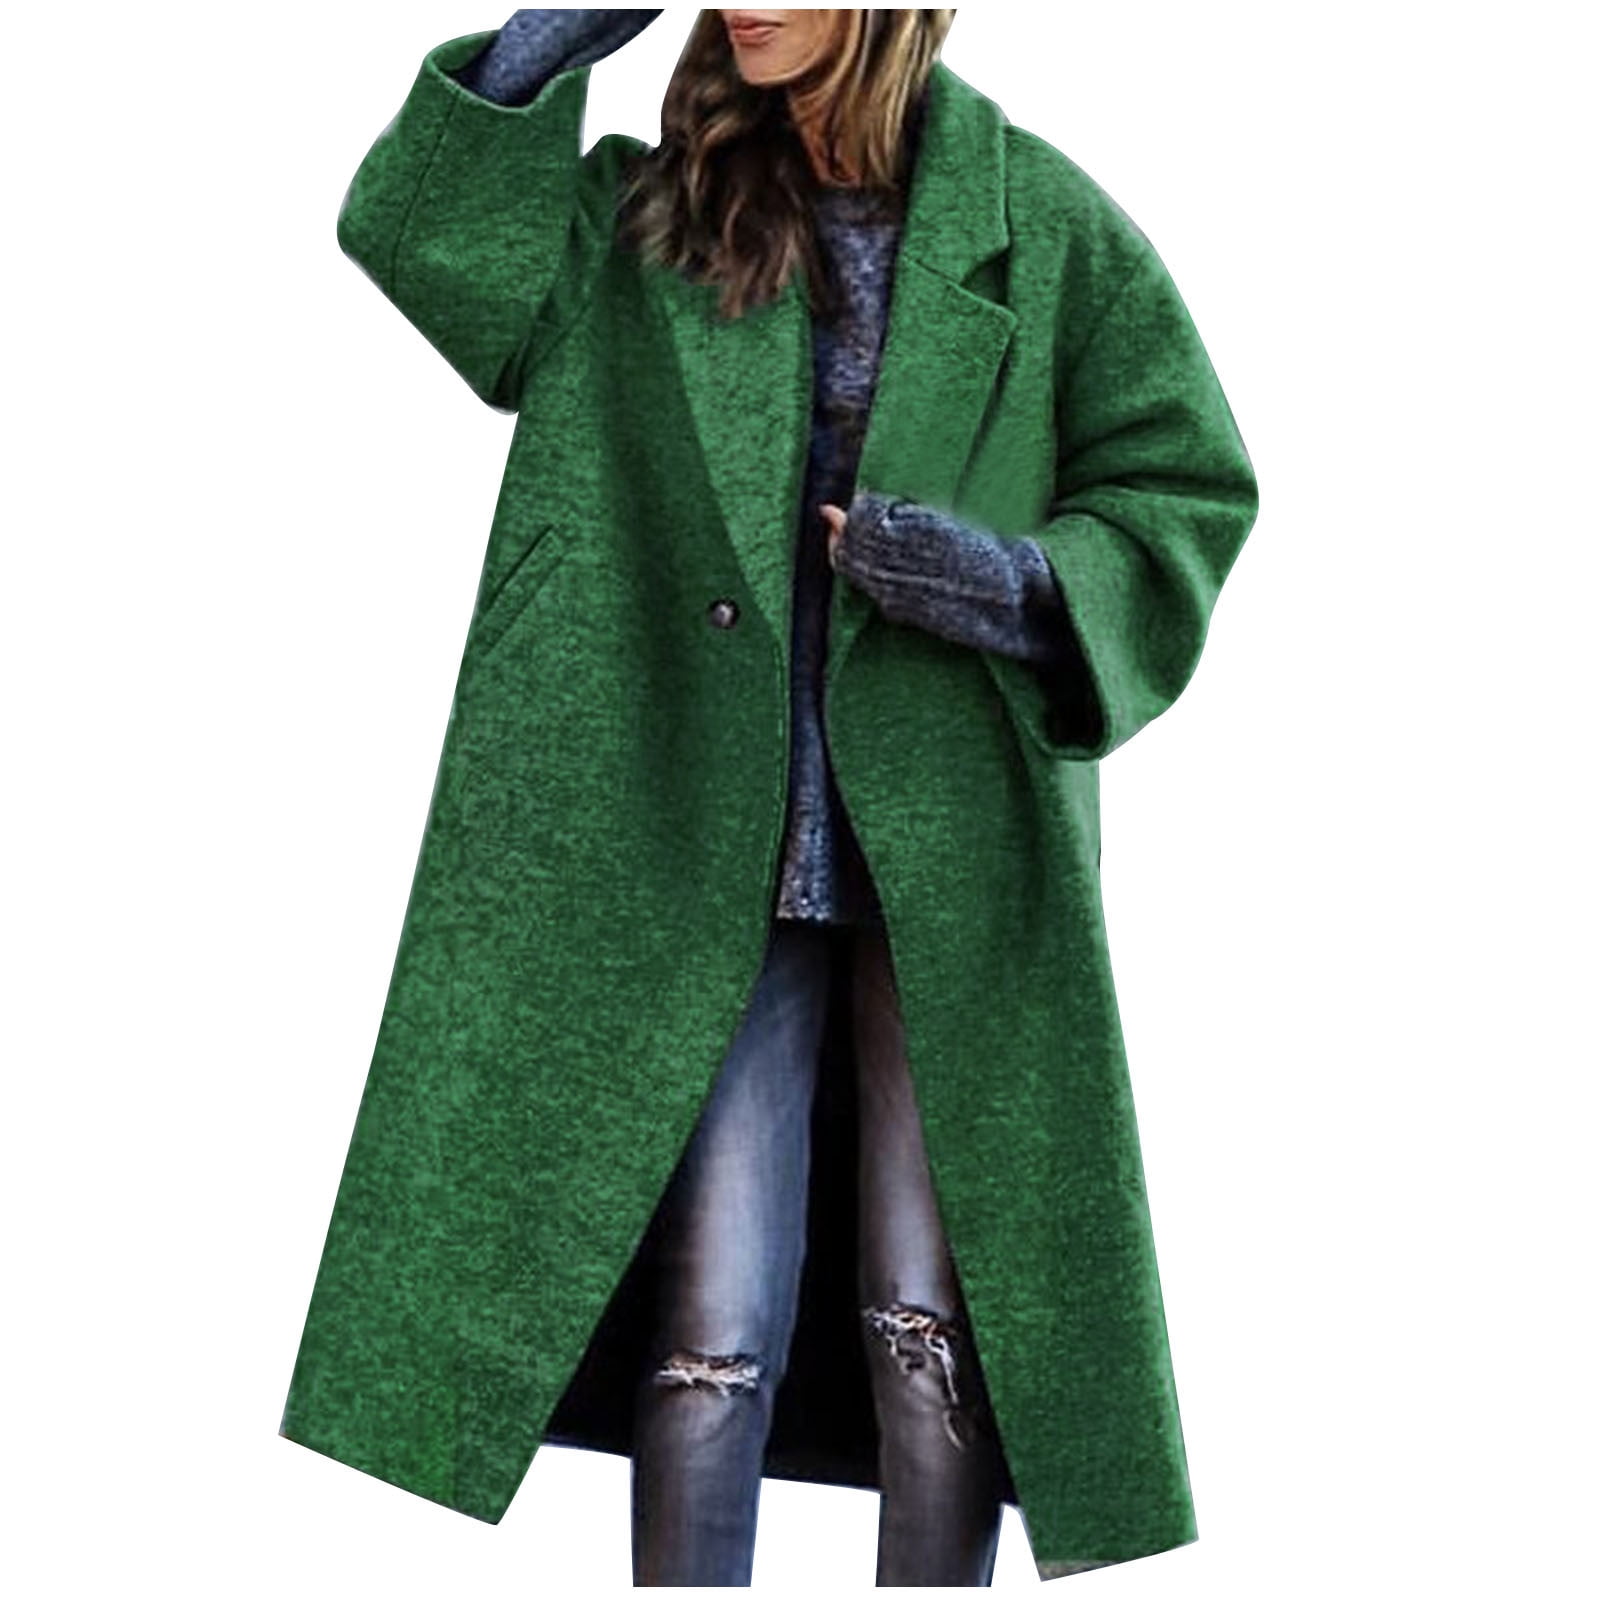 skpabo Winter Coats for Women Open Front Lapel Notched Collar Long Trench  Pea Coat with Pockets Oversized Knit Long Cardigan Jacket Button Fall